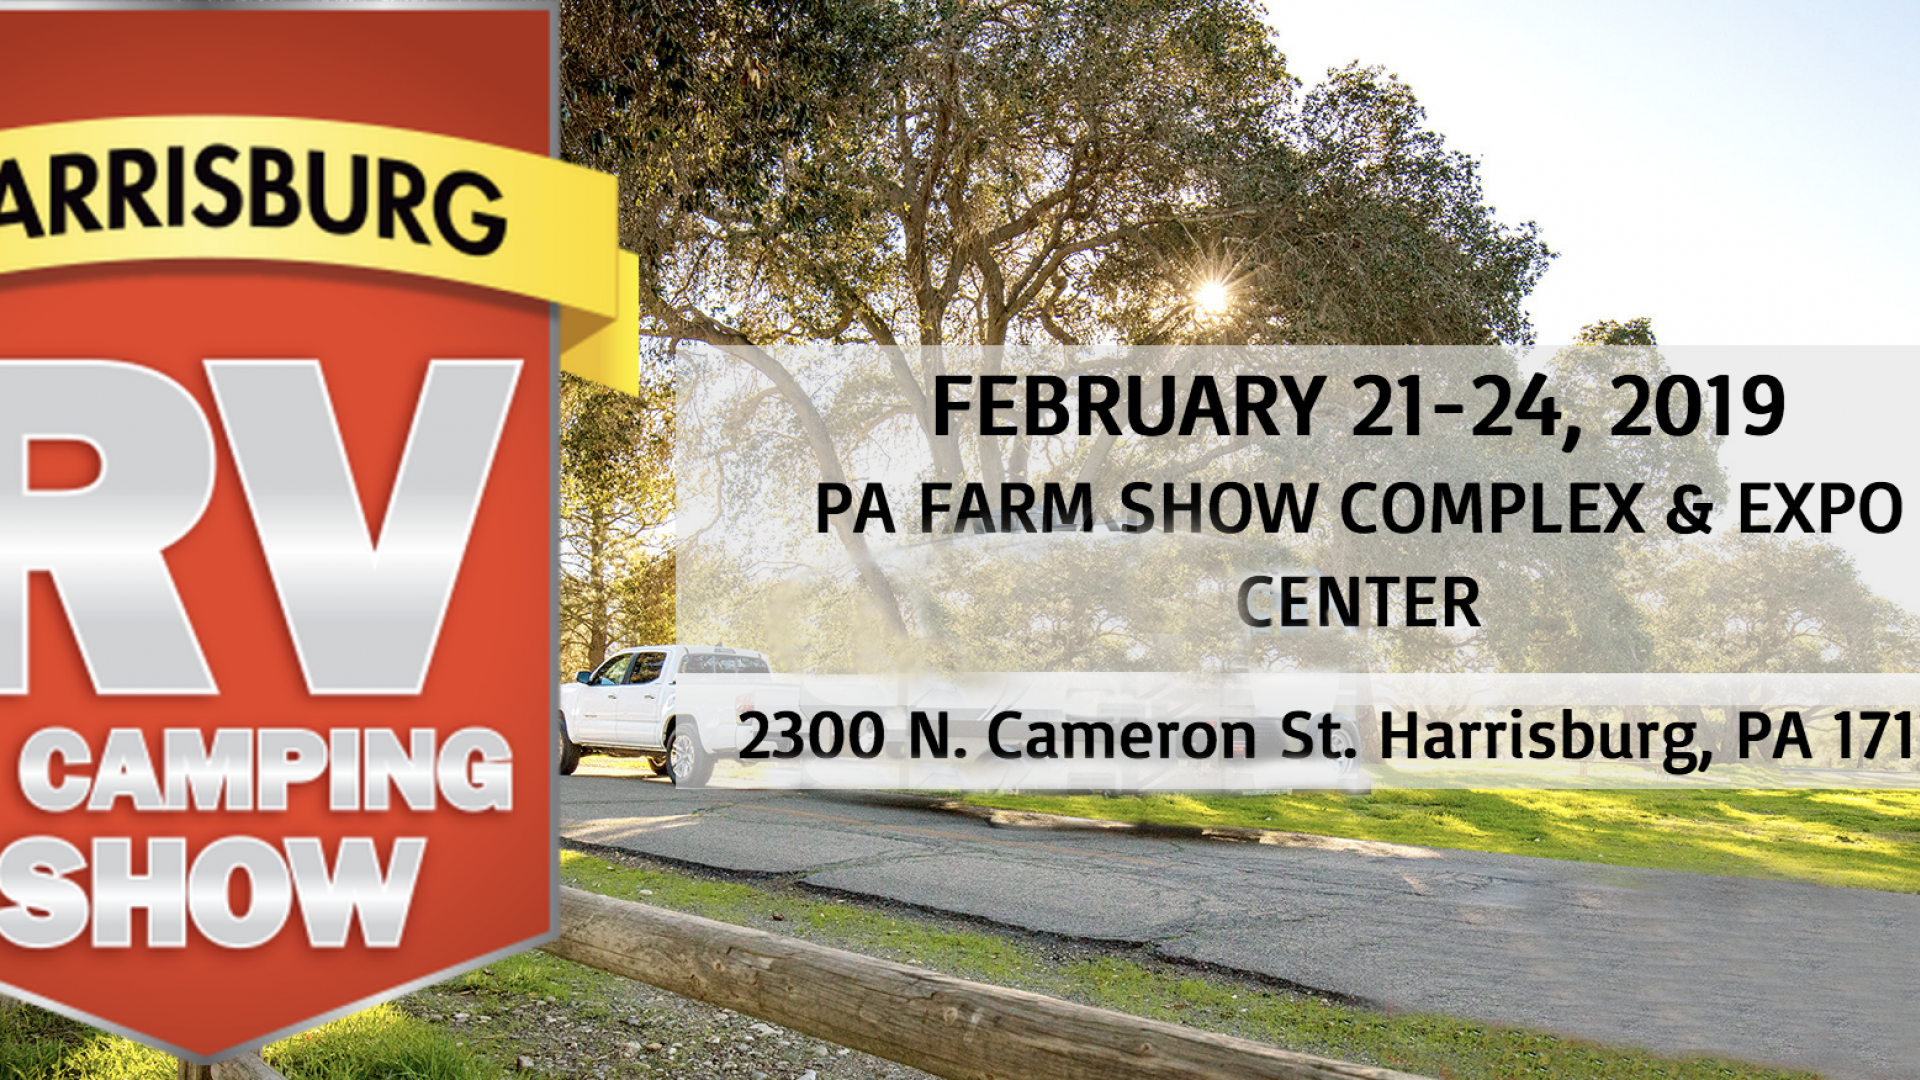 Harrisburg RV and Camping Show GDRV4Life Your Connection to the